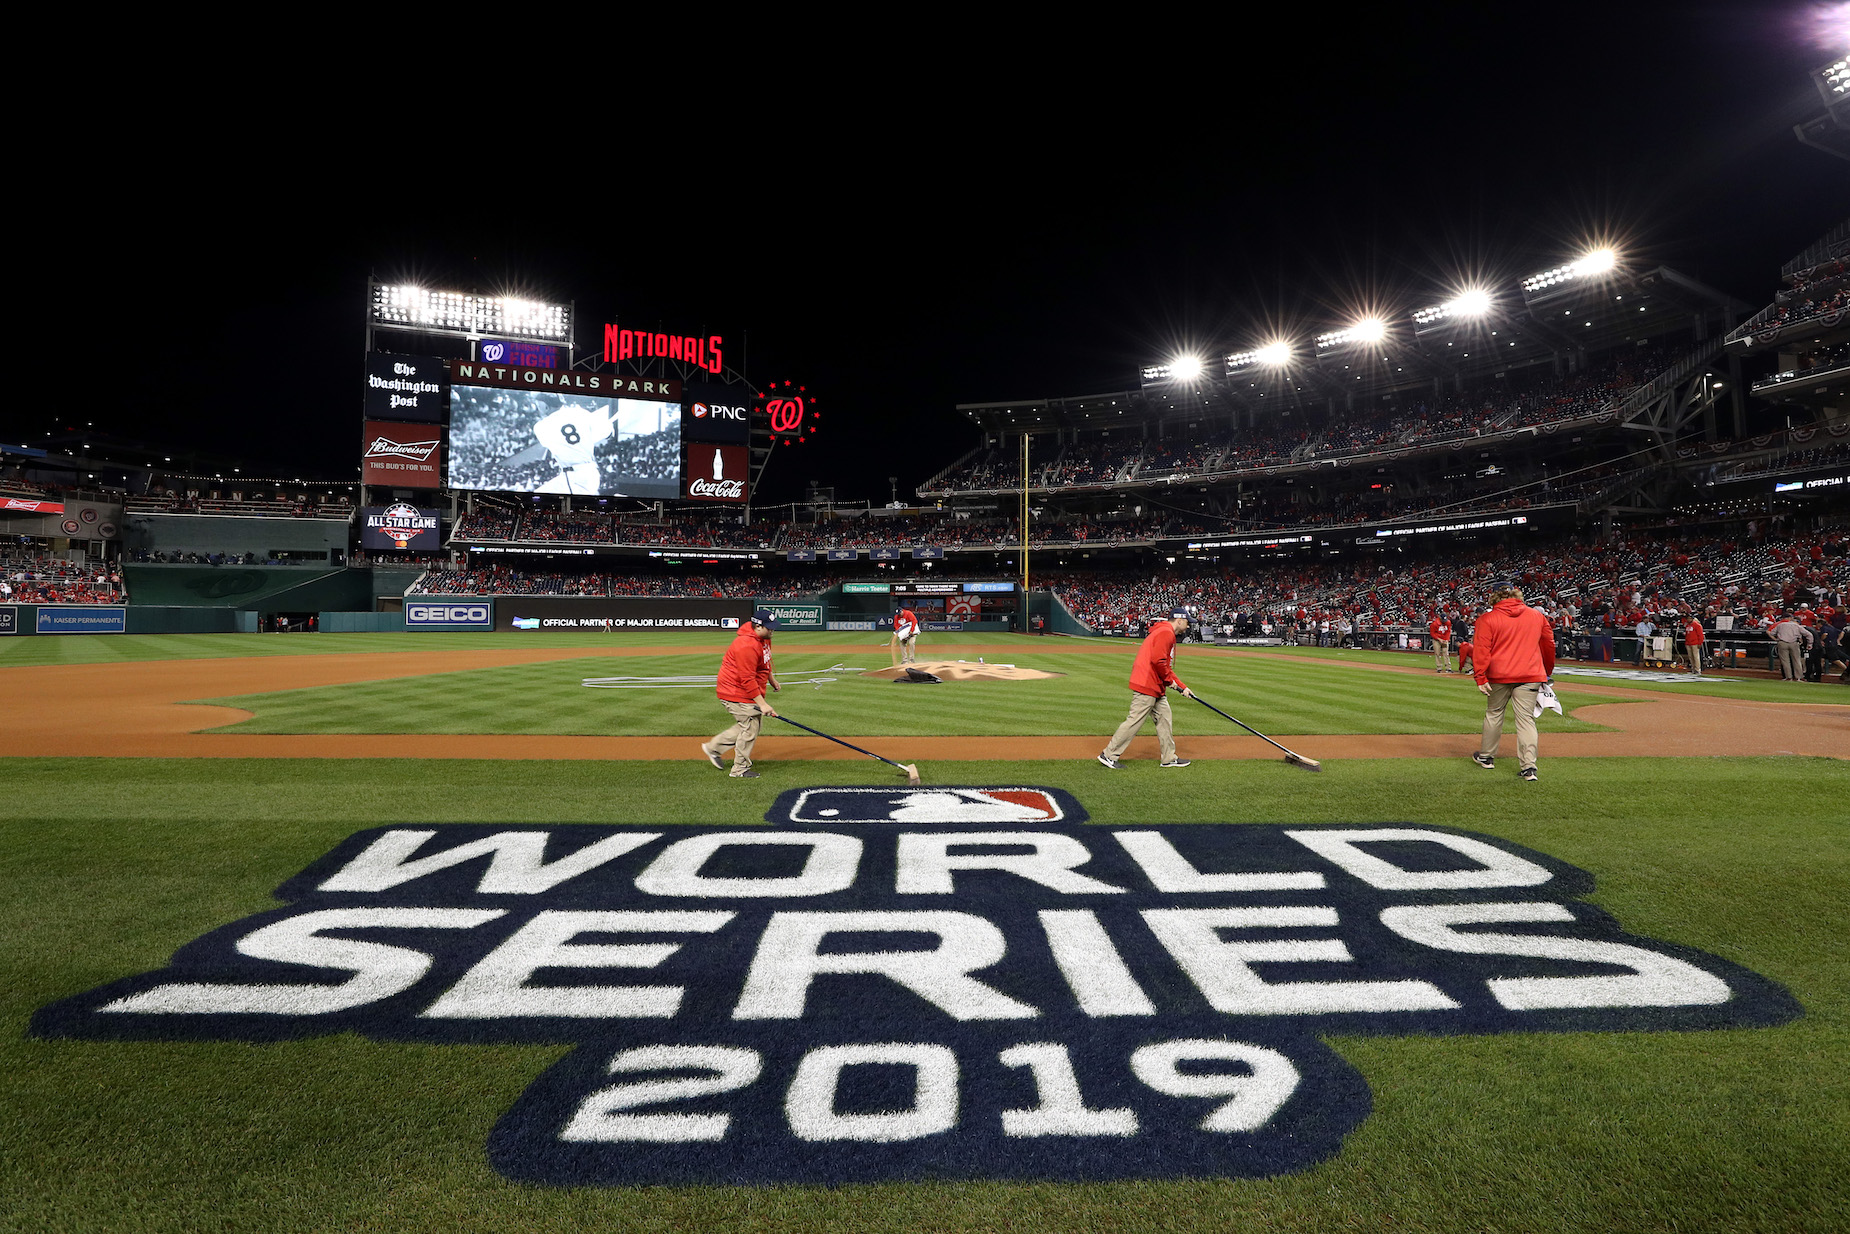 How did the World Series get its name?